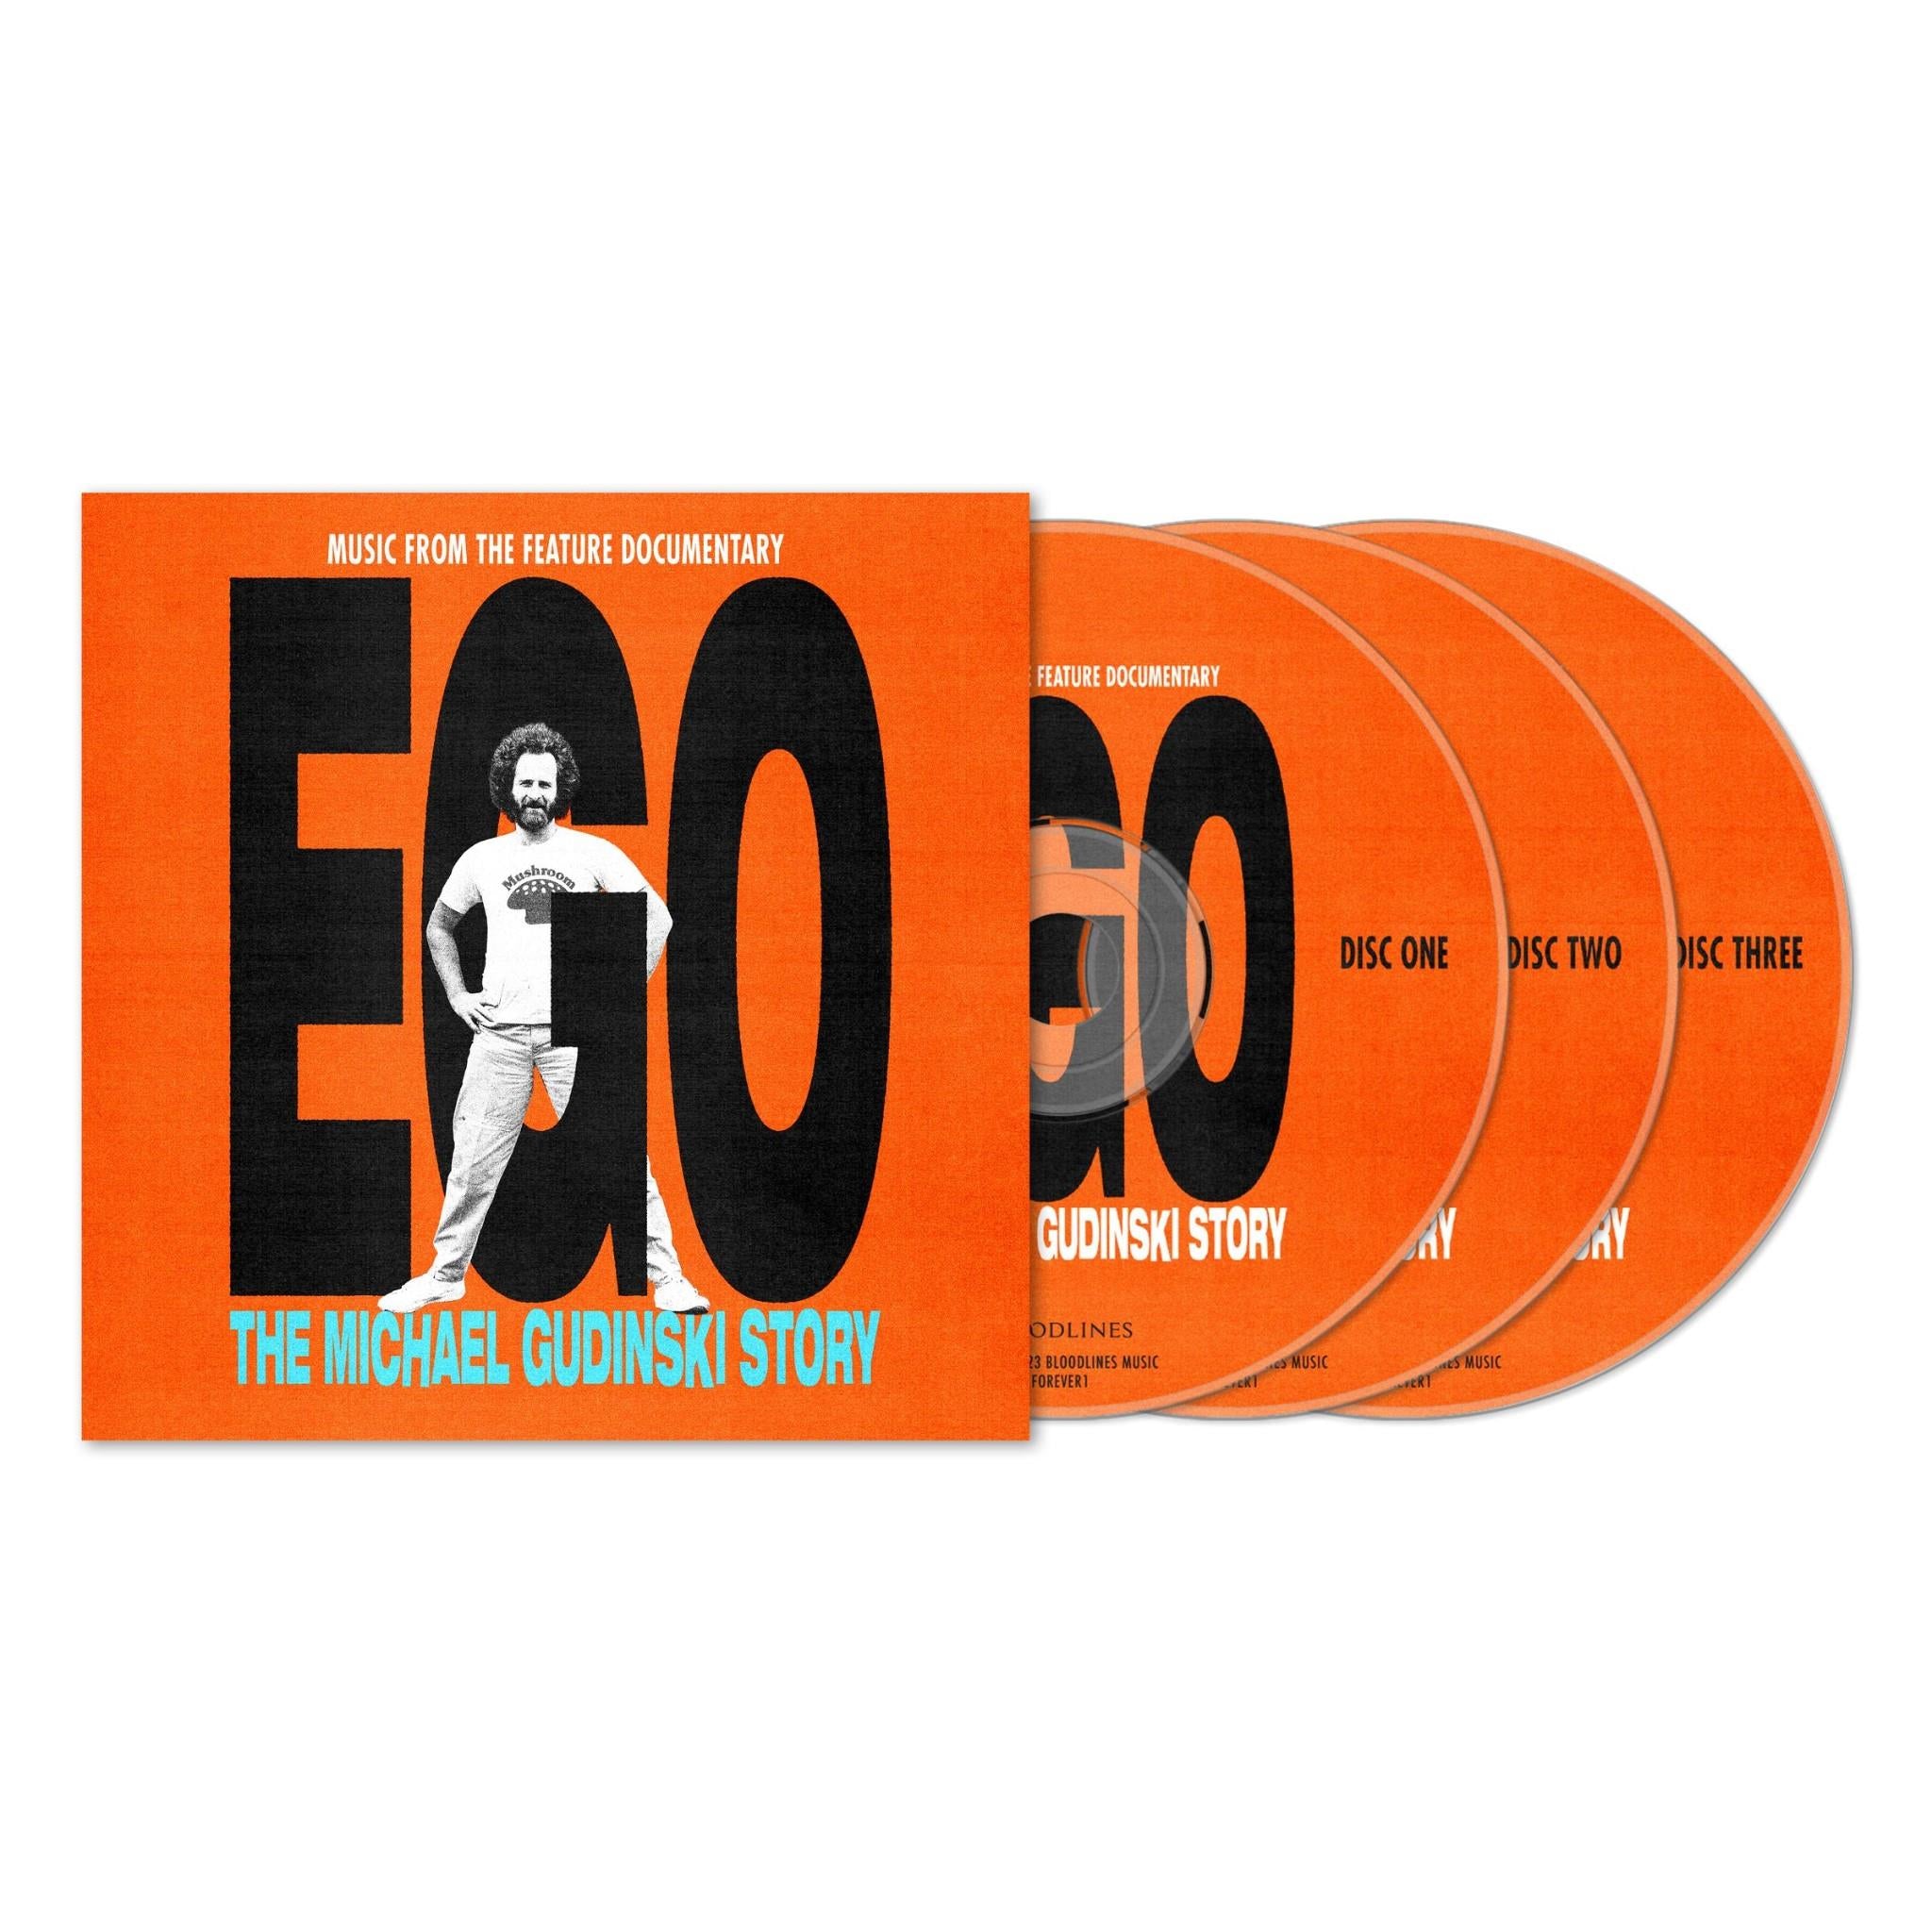 ego: the michael gudinski story (music from the feature documentary)